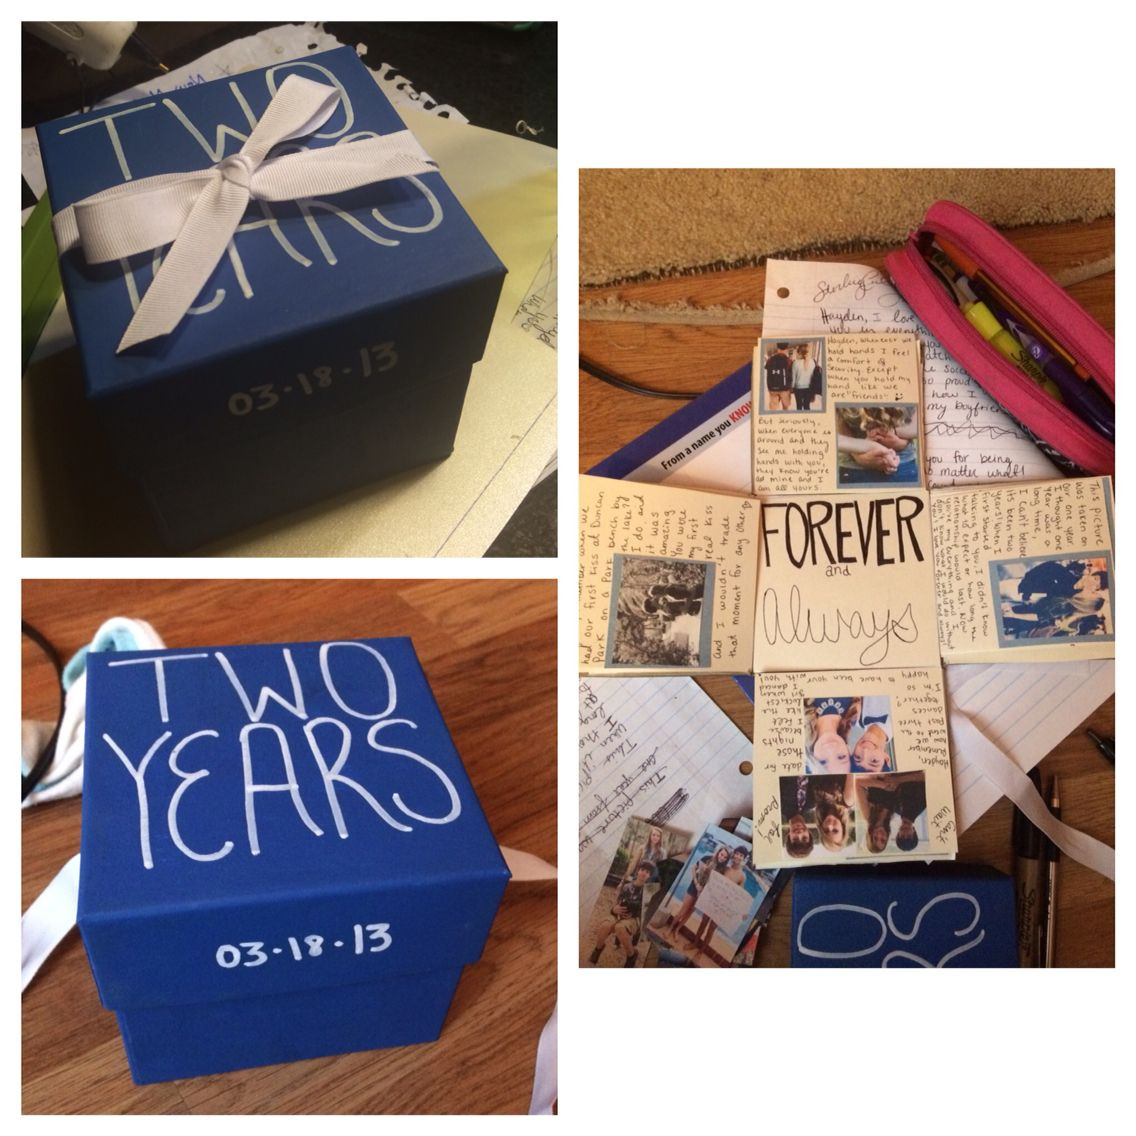 Two Year Anniversary Gift Ideas
 Anniversary box For my boyfriend and I s 2 year I made